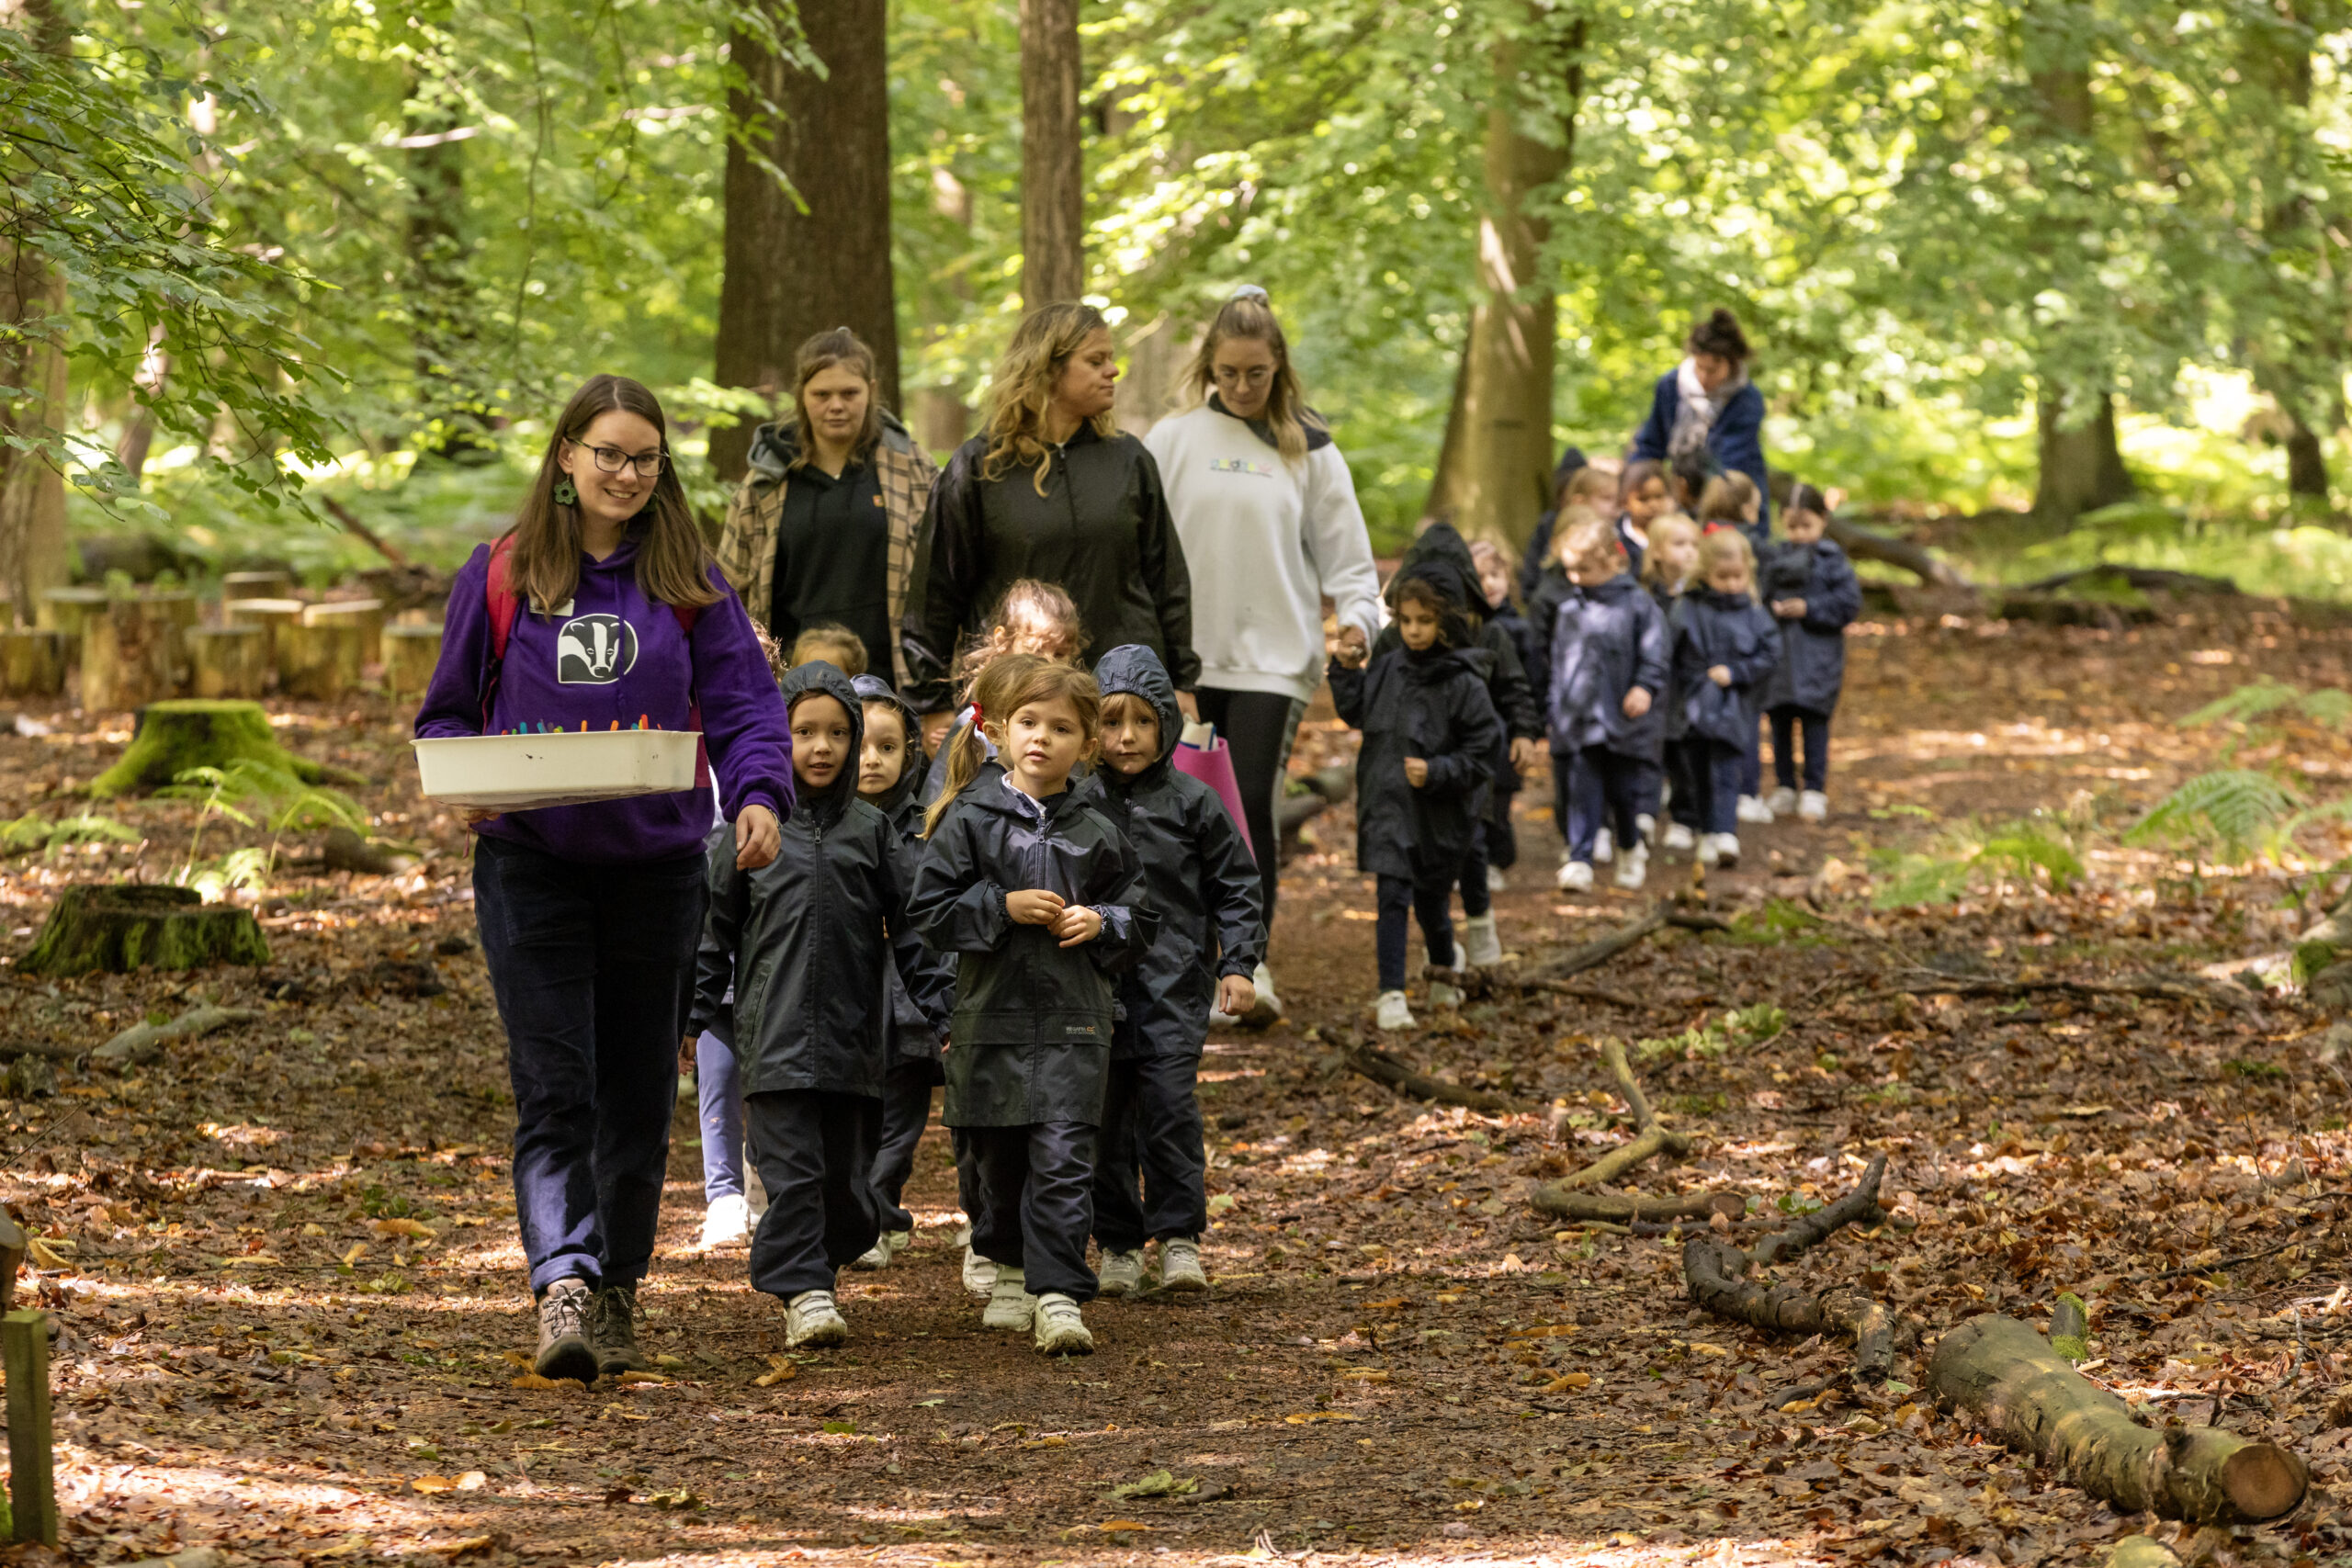 A group of children being led and accompanied by some adults on a bark chipped path in the forest.